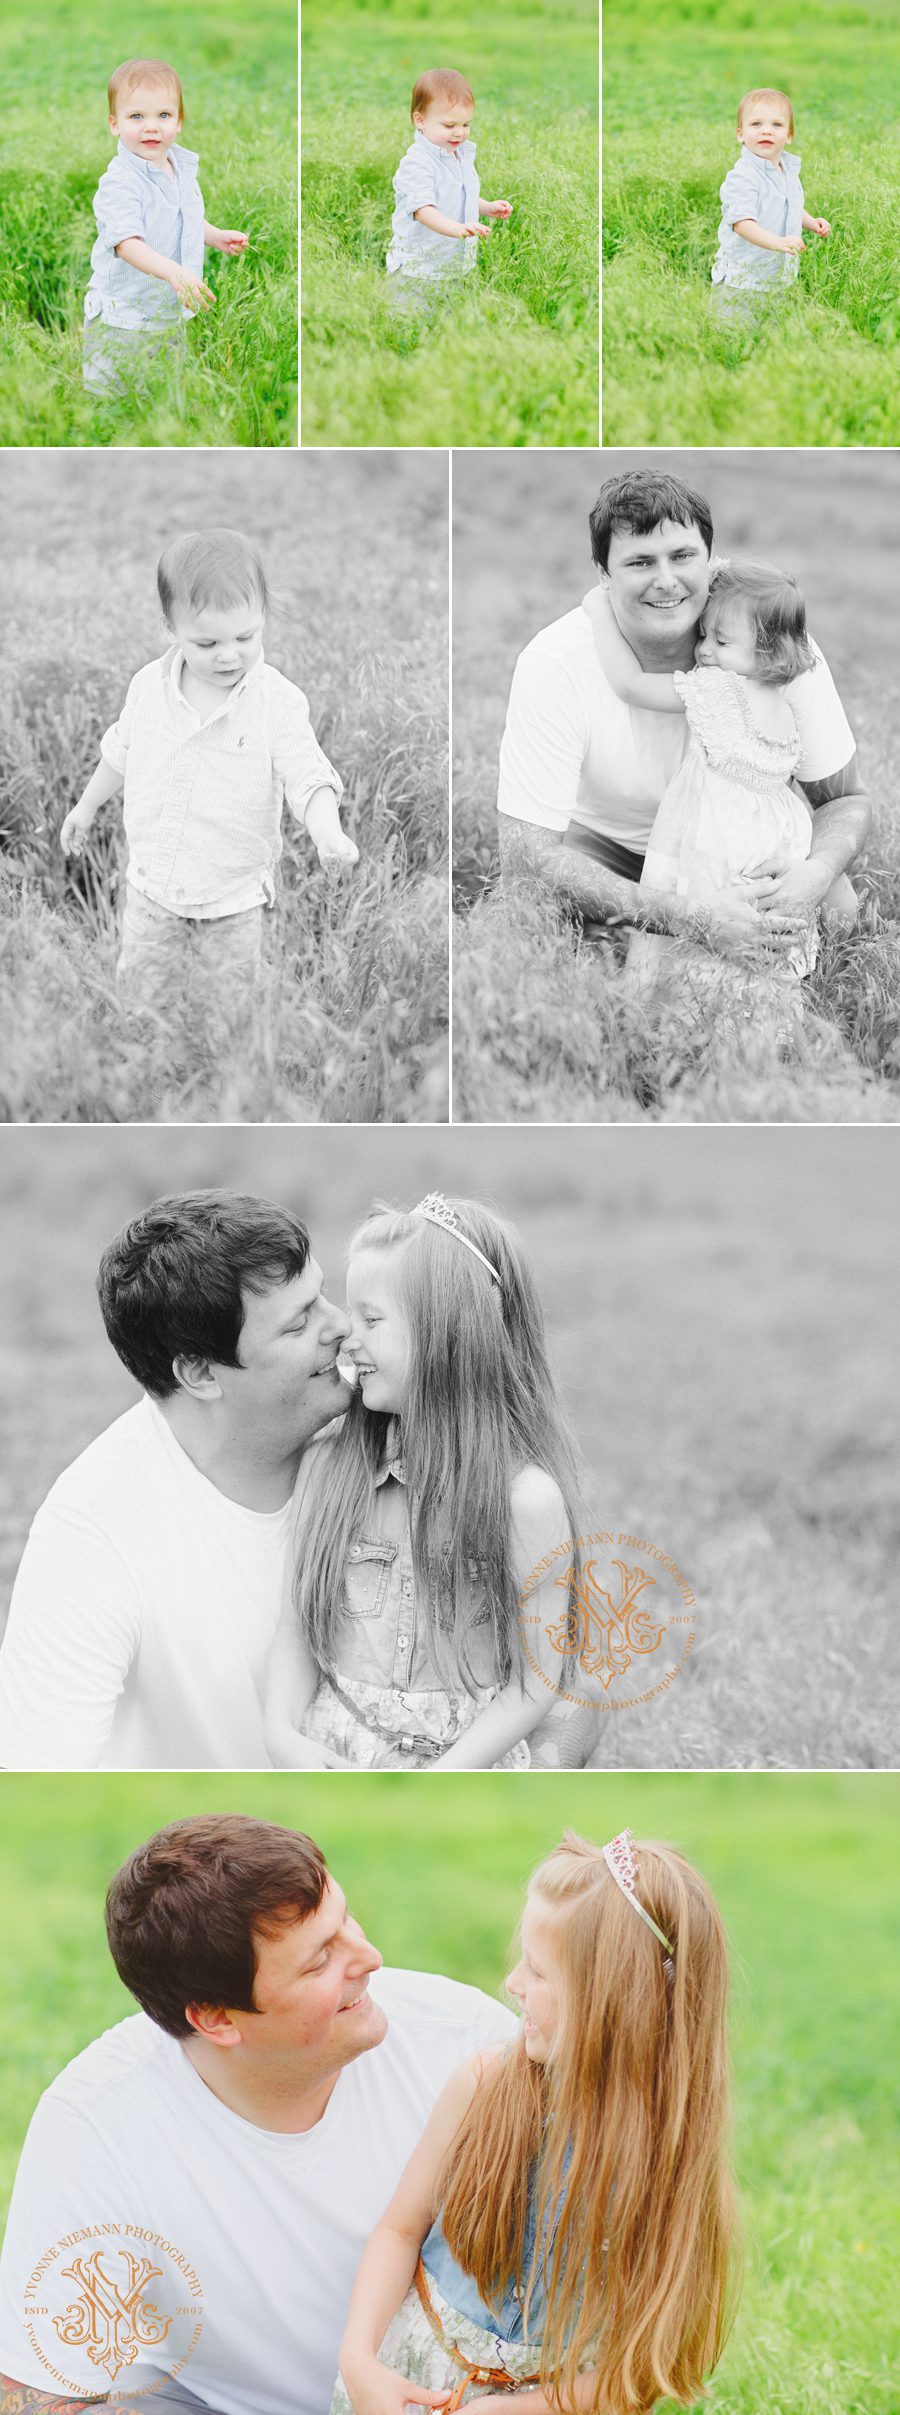 Photos of father with his children in a field in Oconee County, GA.